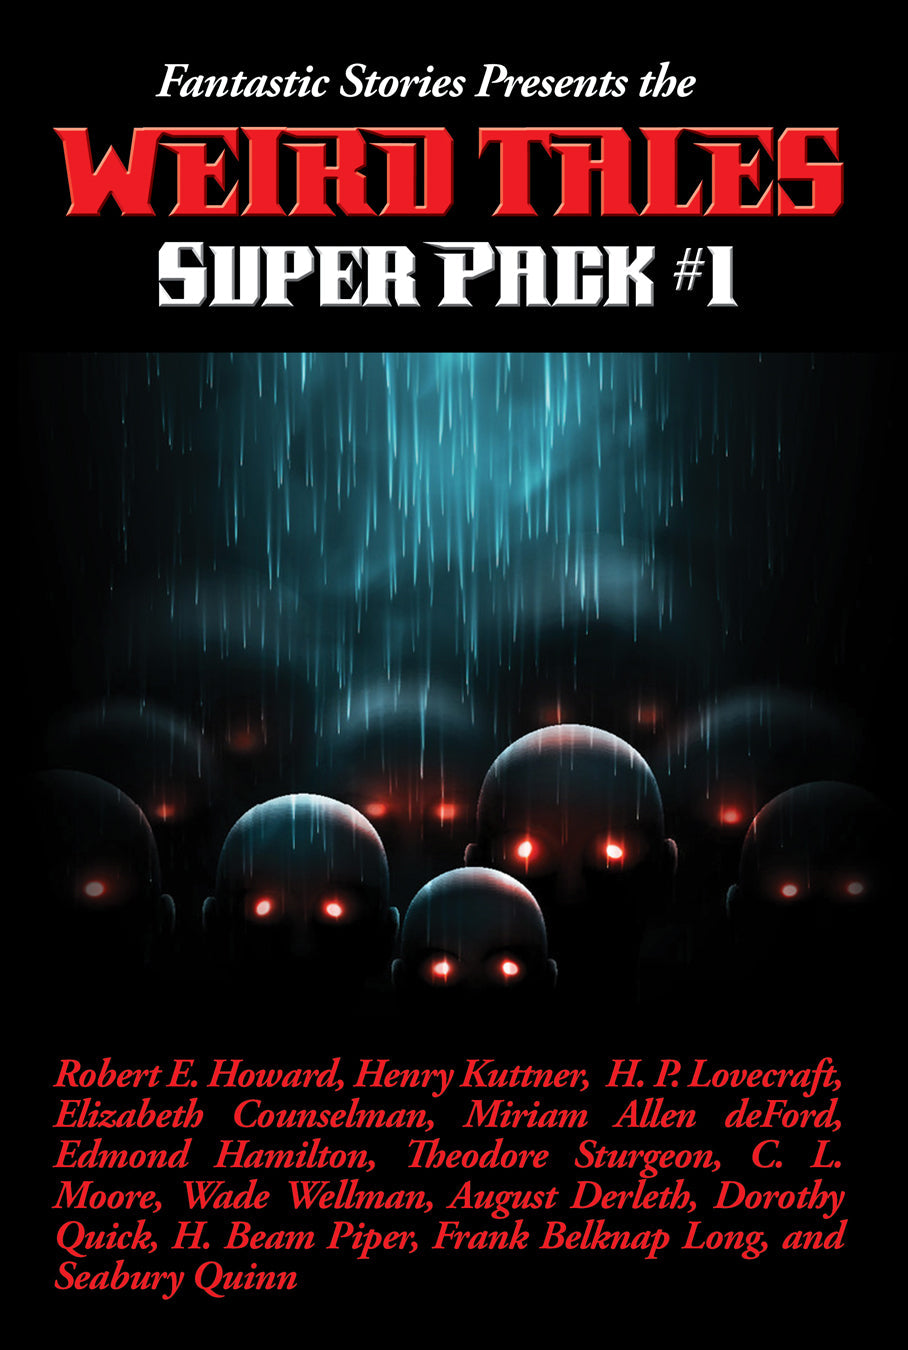 Cover art for Positronic Super Pack #21, the first Weird Tales Super Pack.